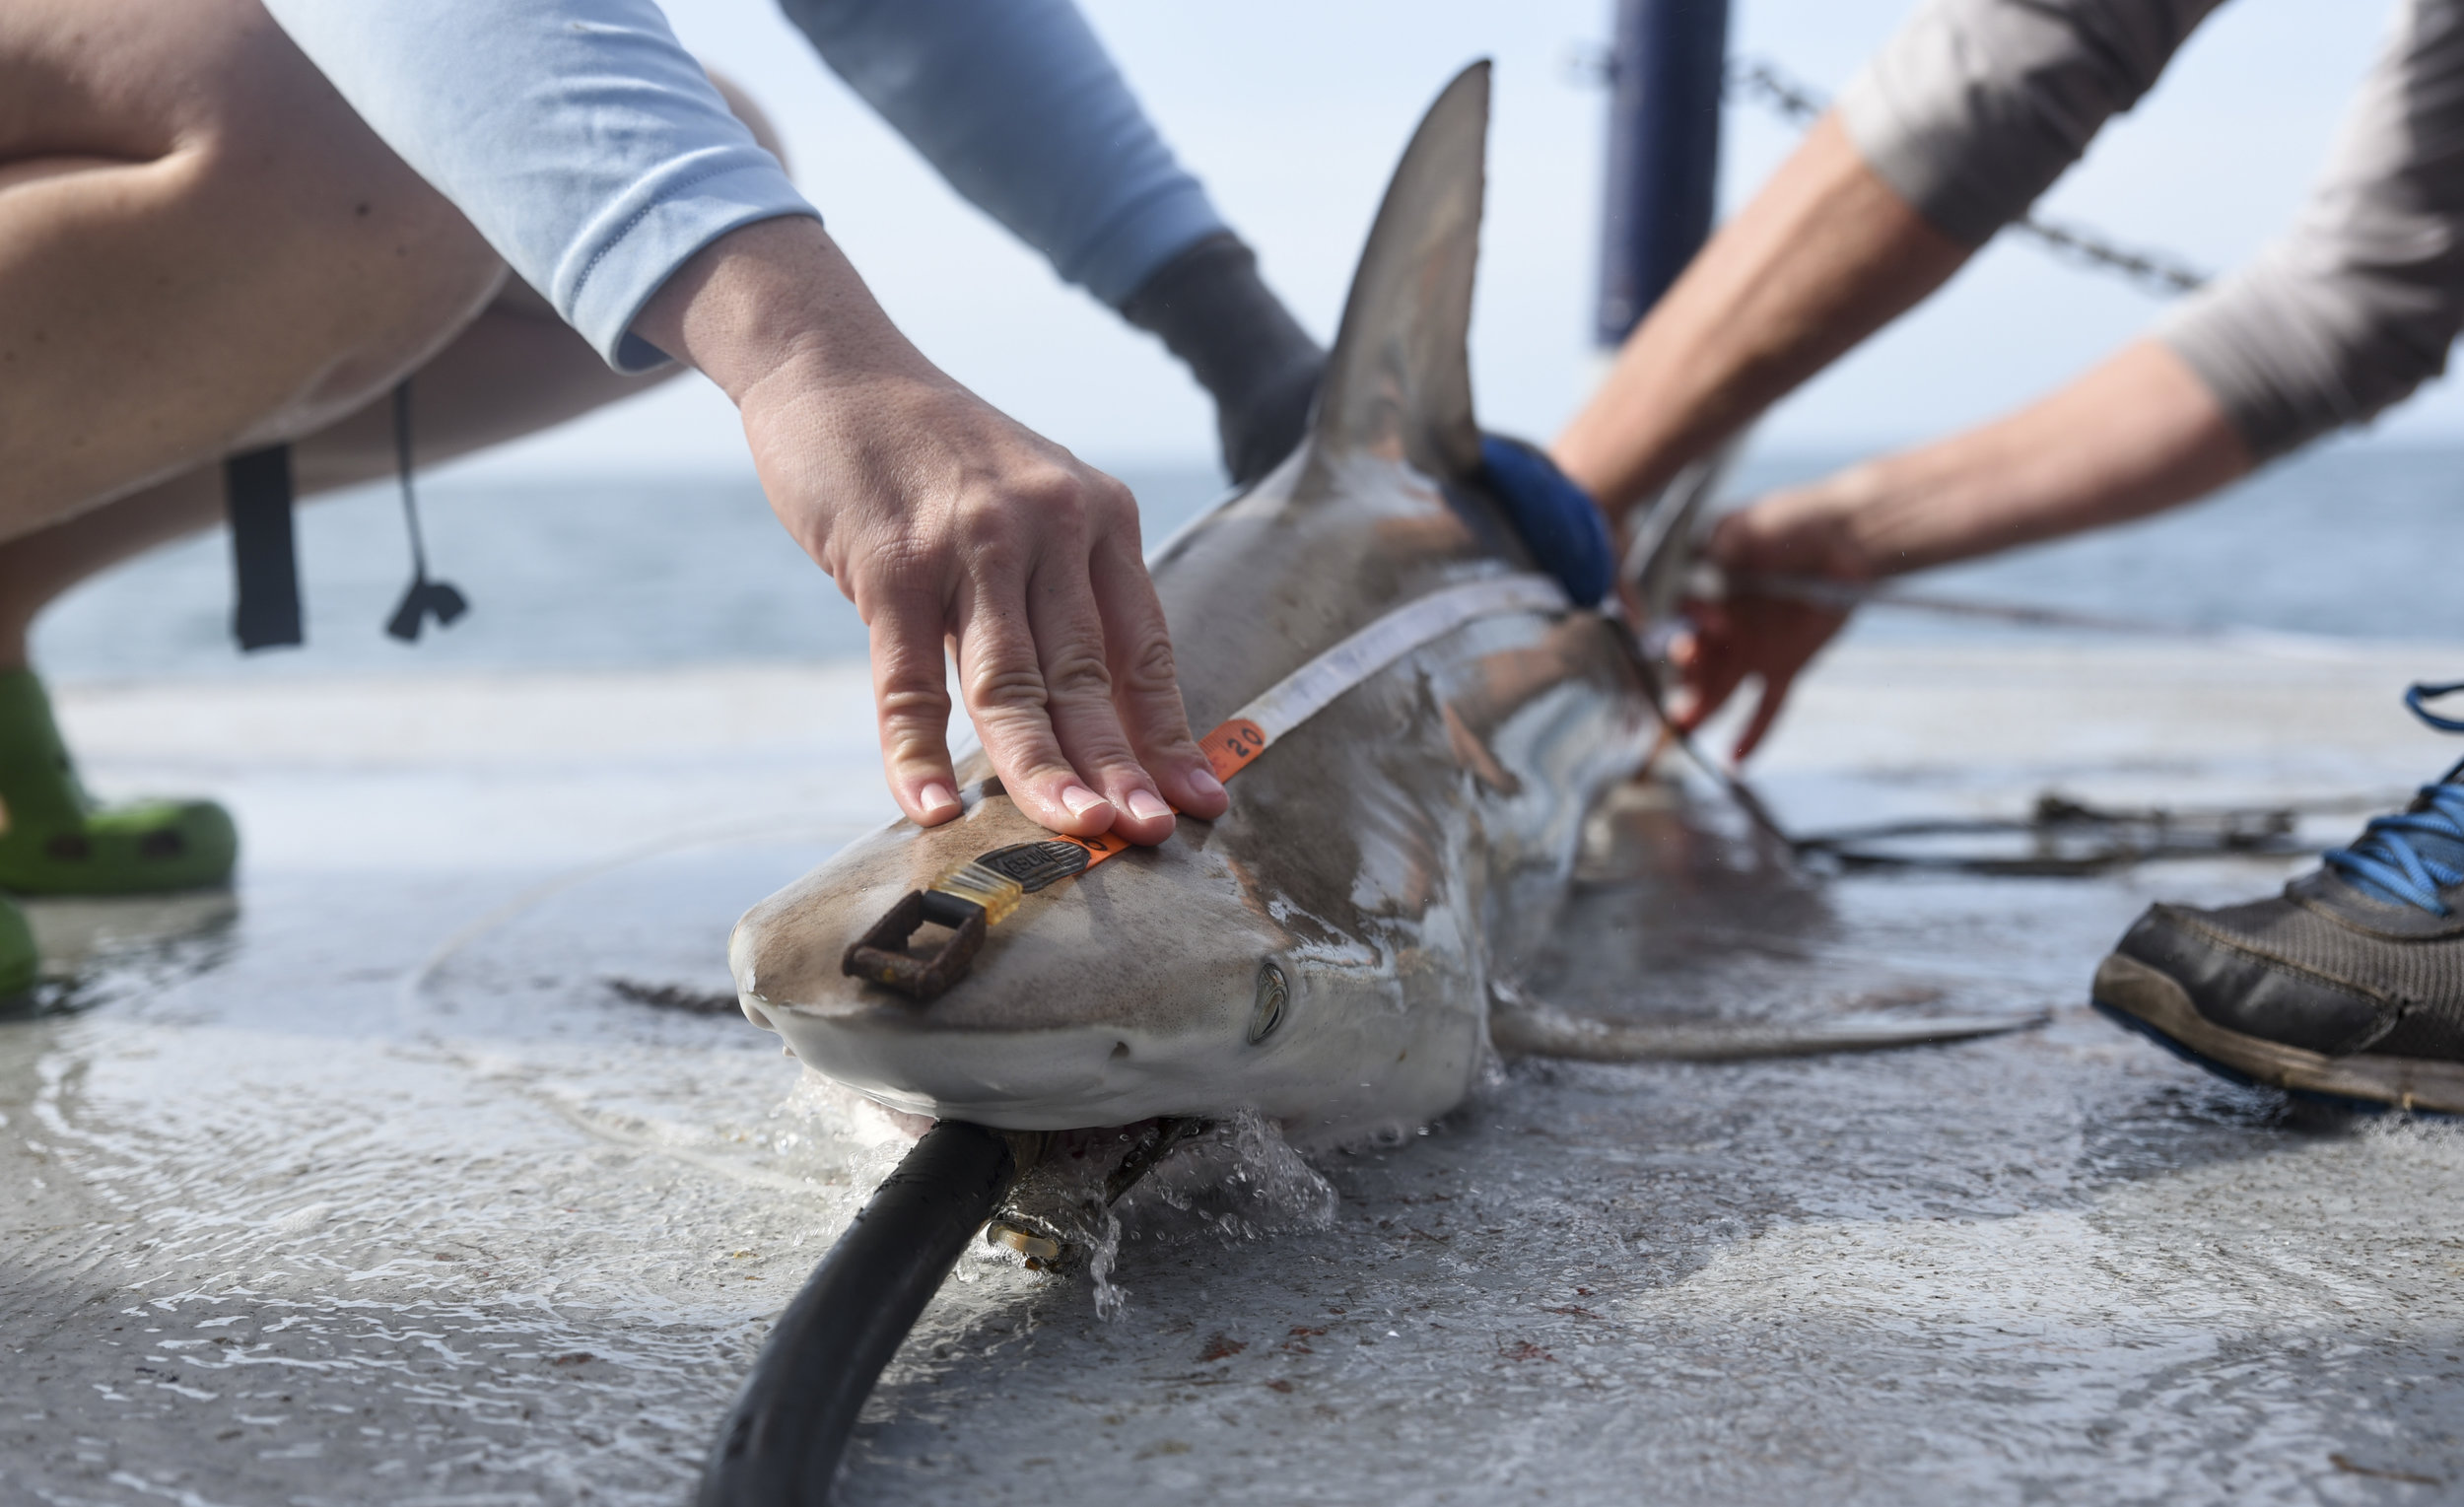  Jayne Gardiner of the New College of Florida, left, and Jack Morris of the Mote Marine Lab, measure the length of a male Blacktip shark brought aboard.&nbsp;A hose spouting sea water, called a resuscitation hose, is placed in the shark's mouth to al